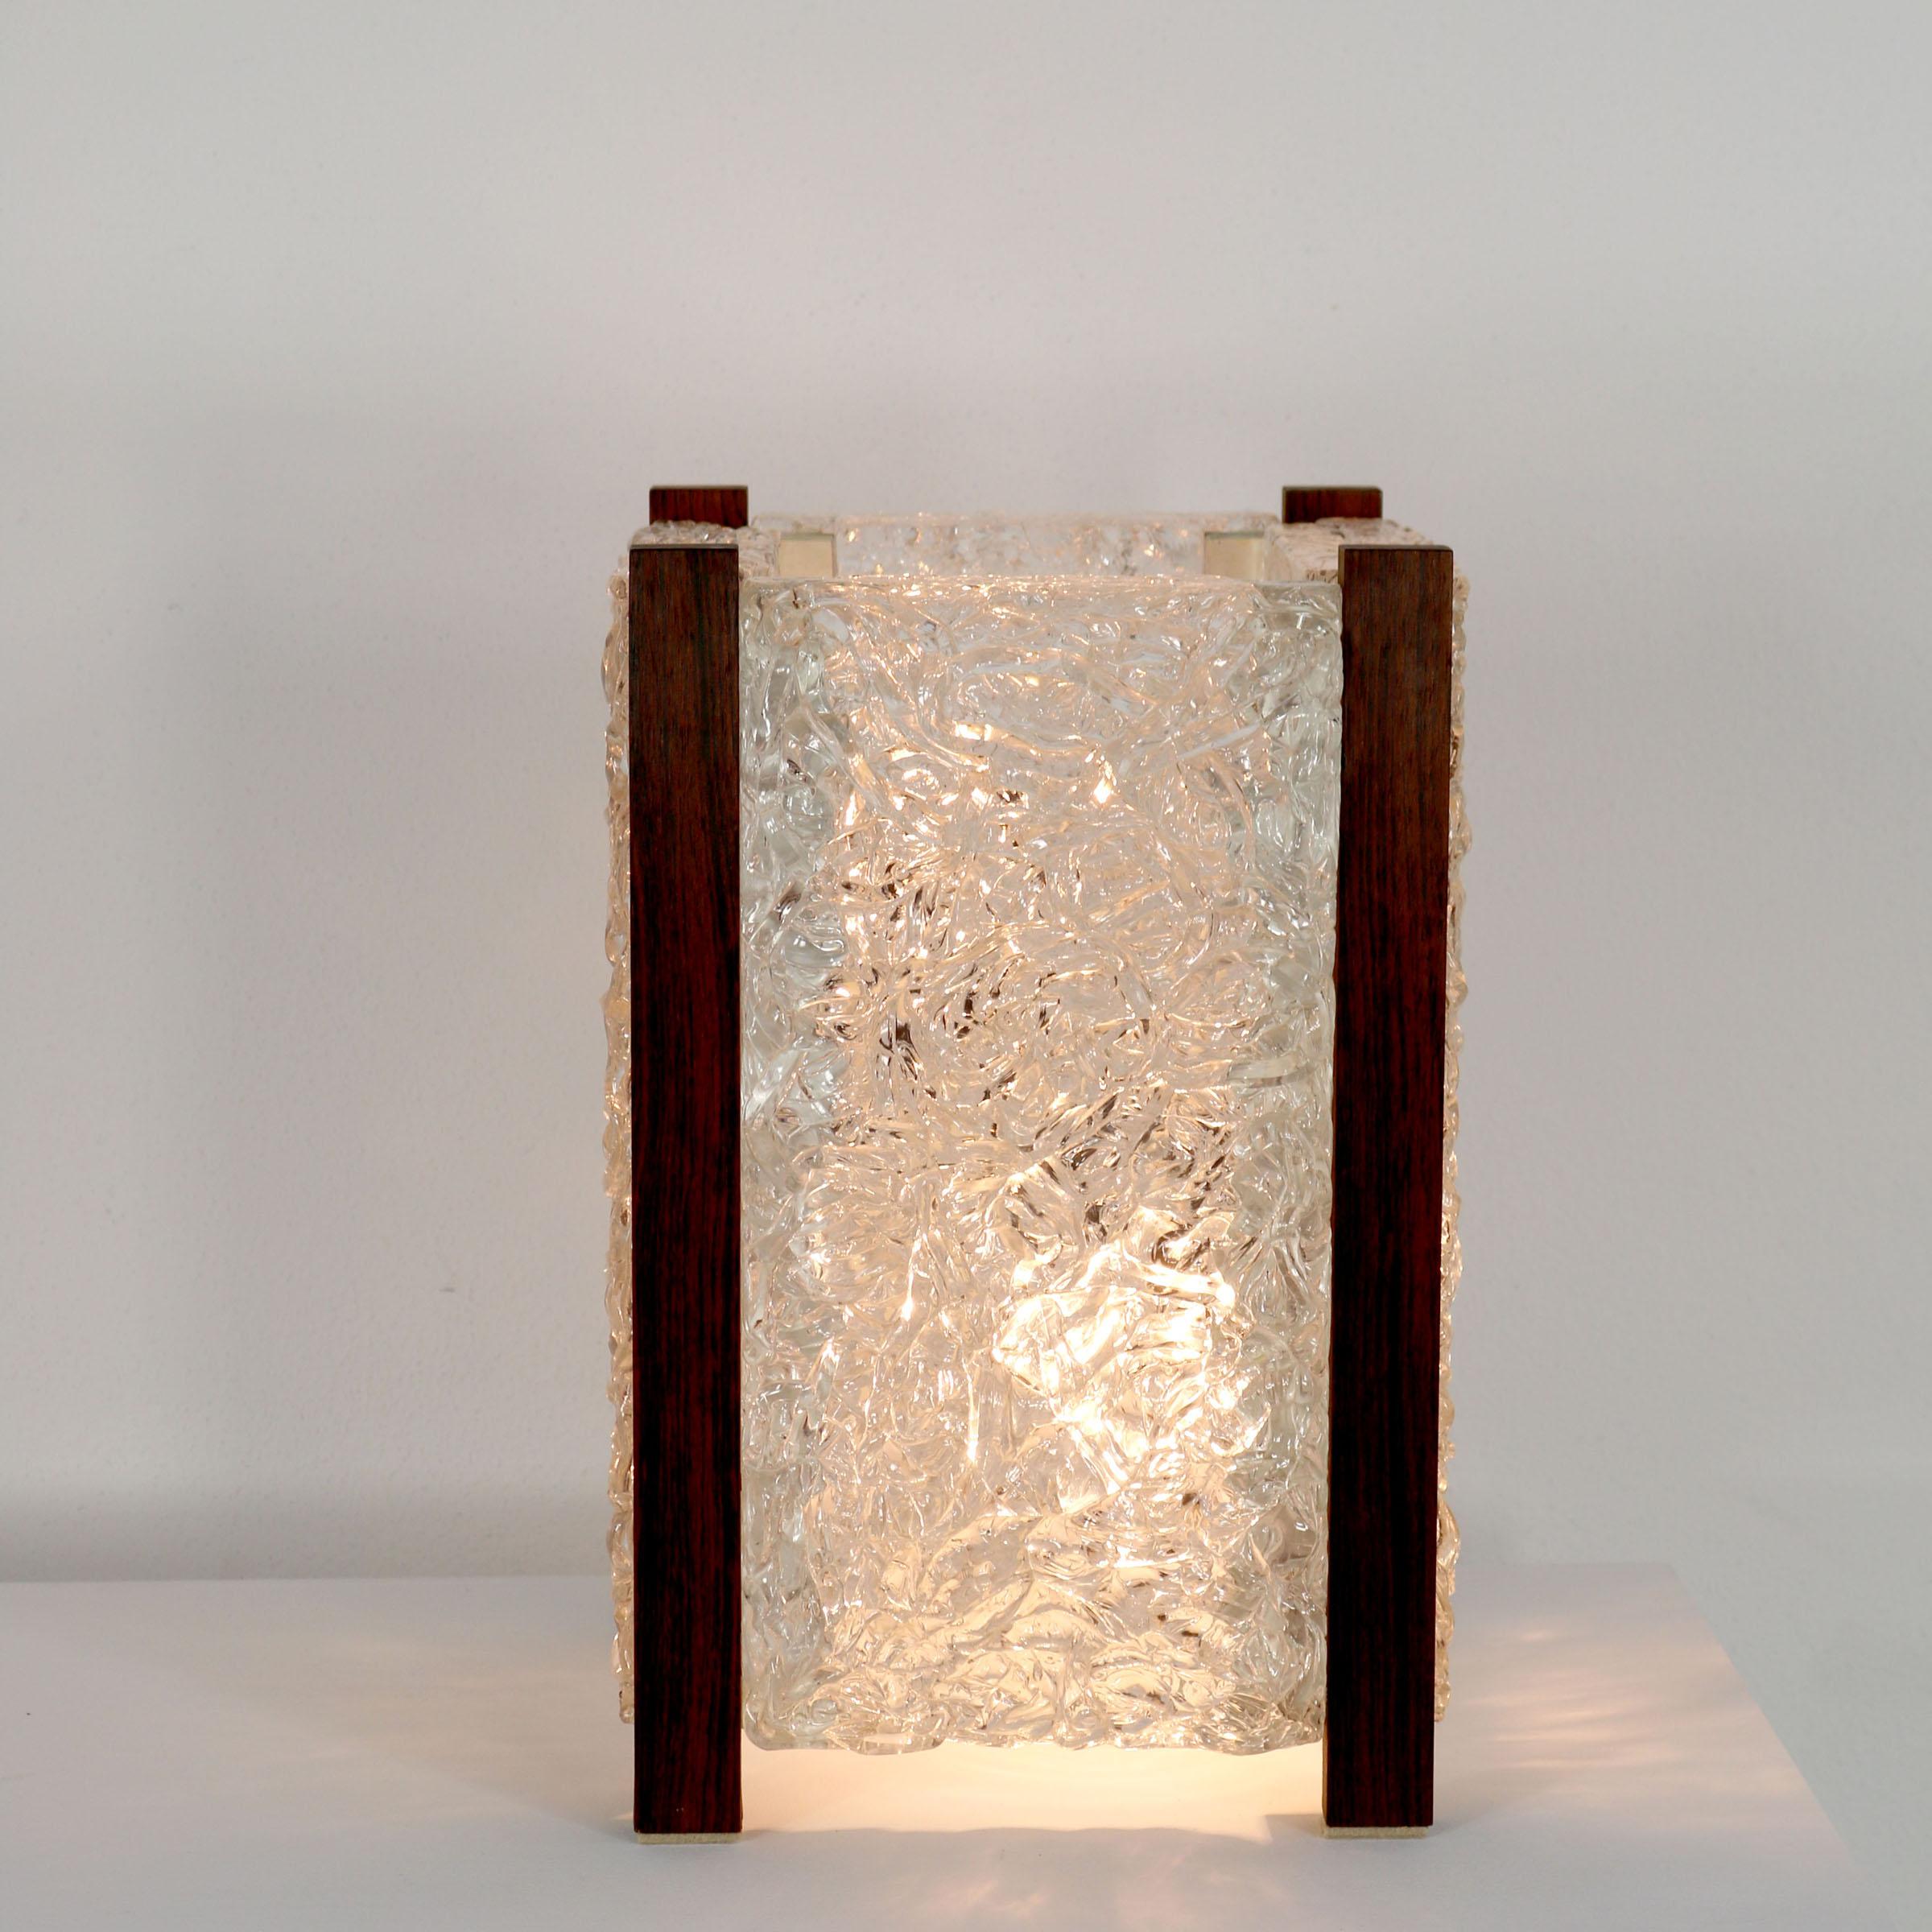 Elegant rectangular Mid-Century Modern table lamp with thick textured acrylic glass and rosewood frame. Designed and manufactured probably in Scandinavia, 1970s.
The lamp is in working condition, 2 x E14 bulb sockets. Pleasant warm light tone and in